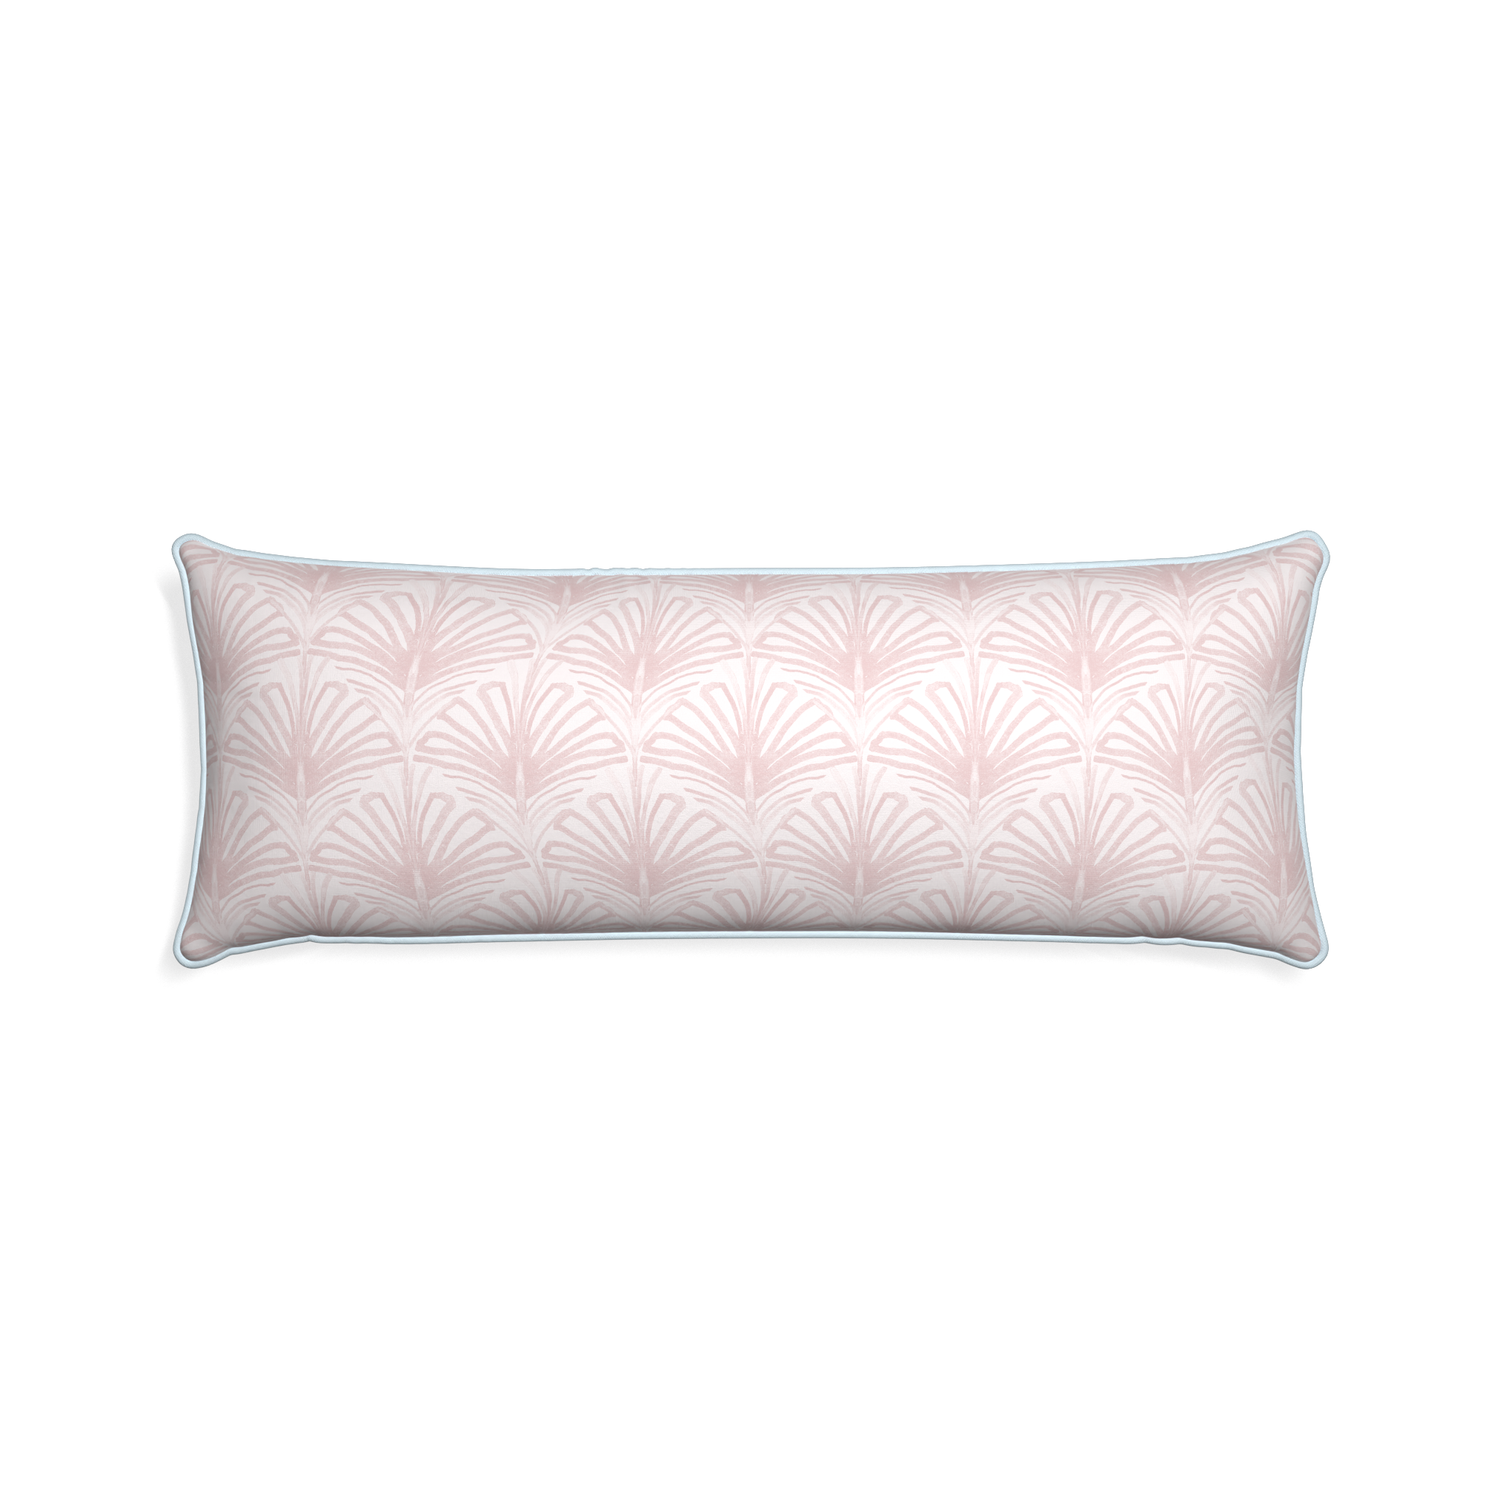 Xl-lumbar suzy rose custom pillow with powder piping on white background